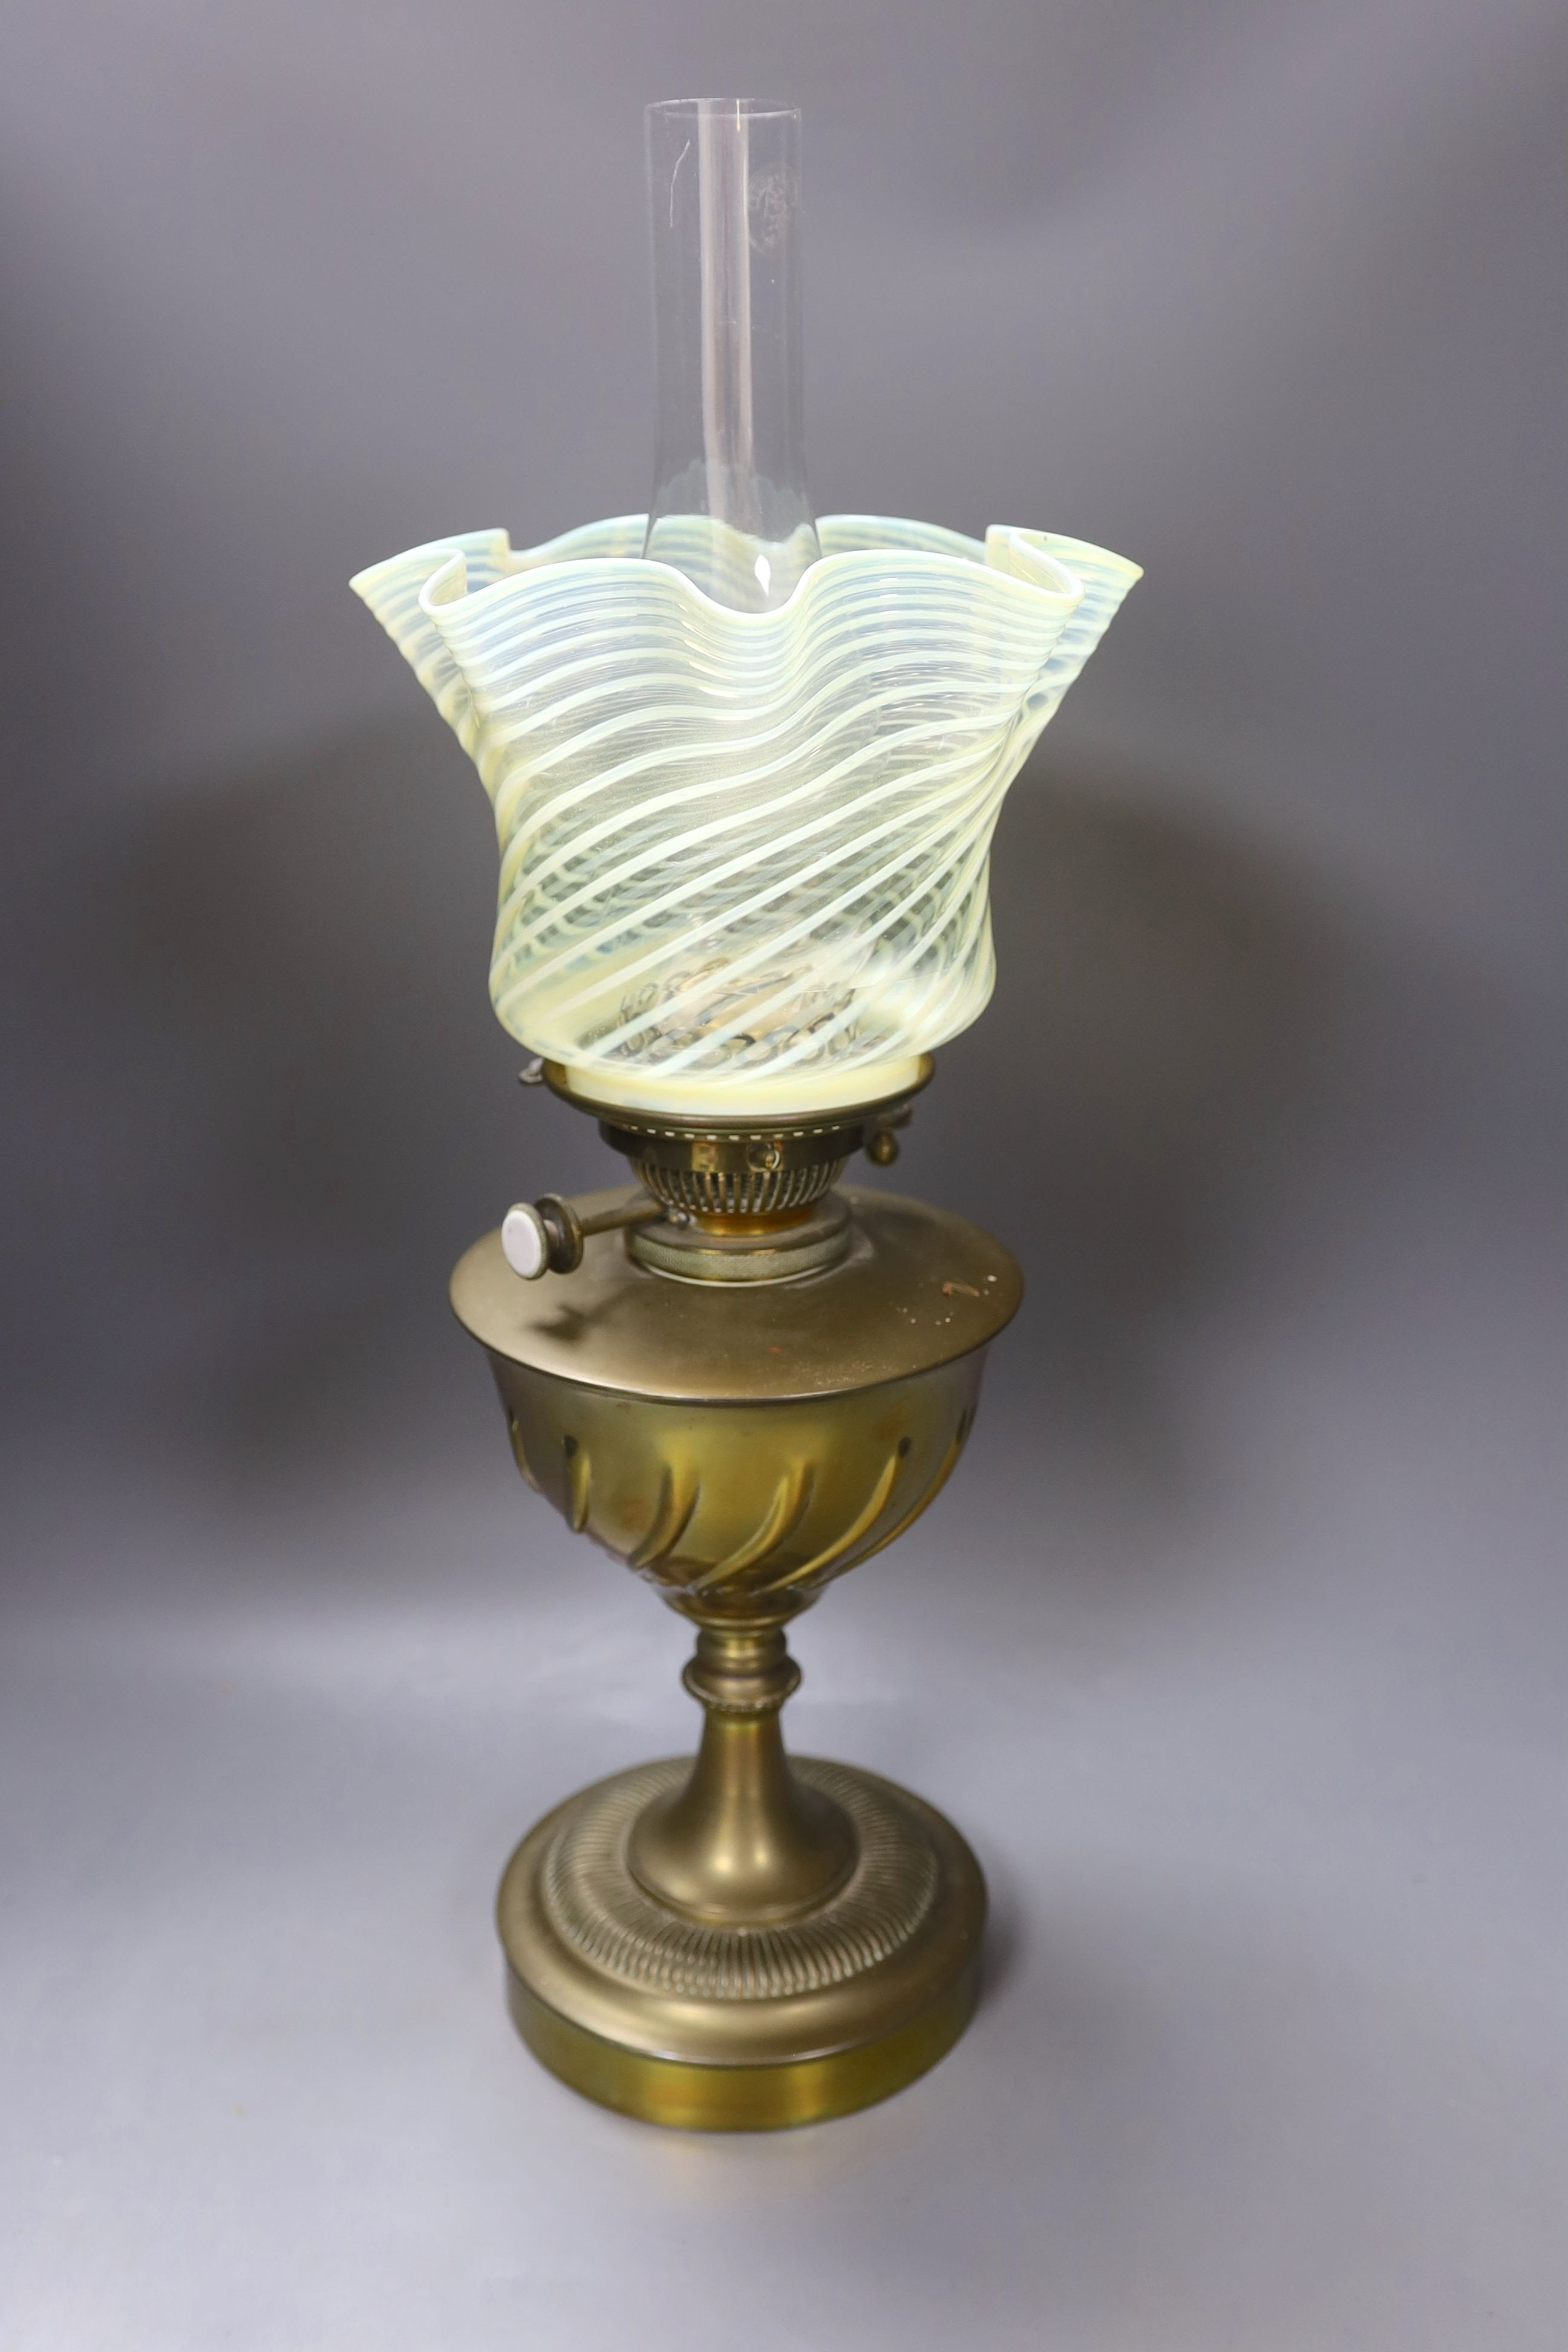 An oil lamp with vaseline glass shade - 56cm tall